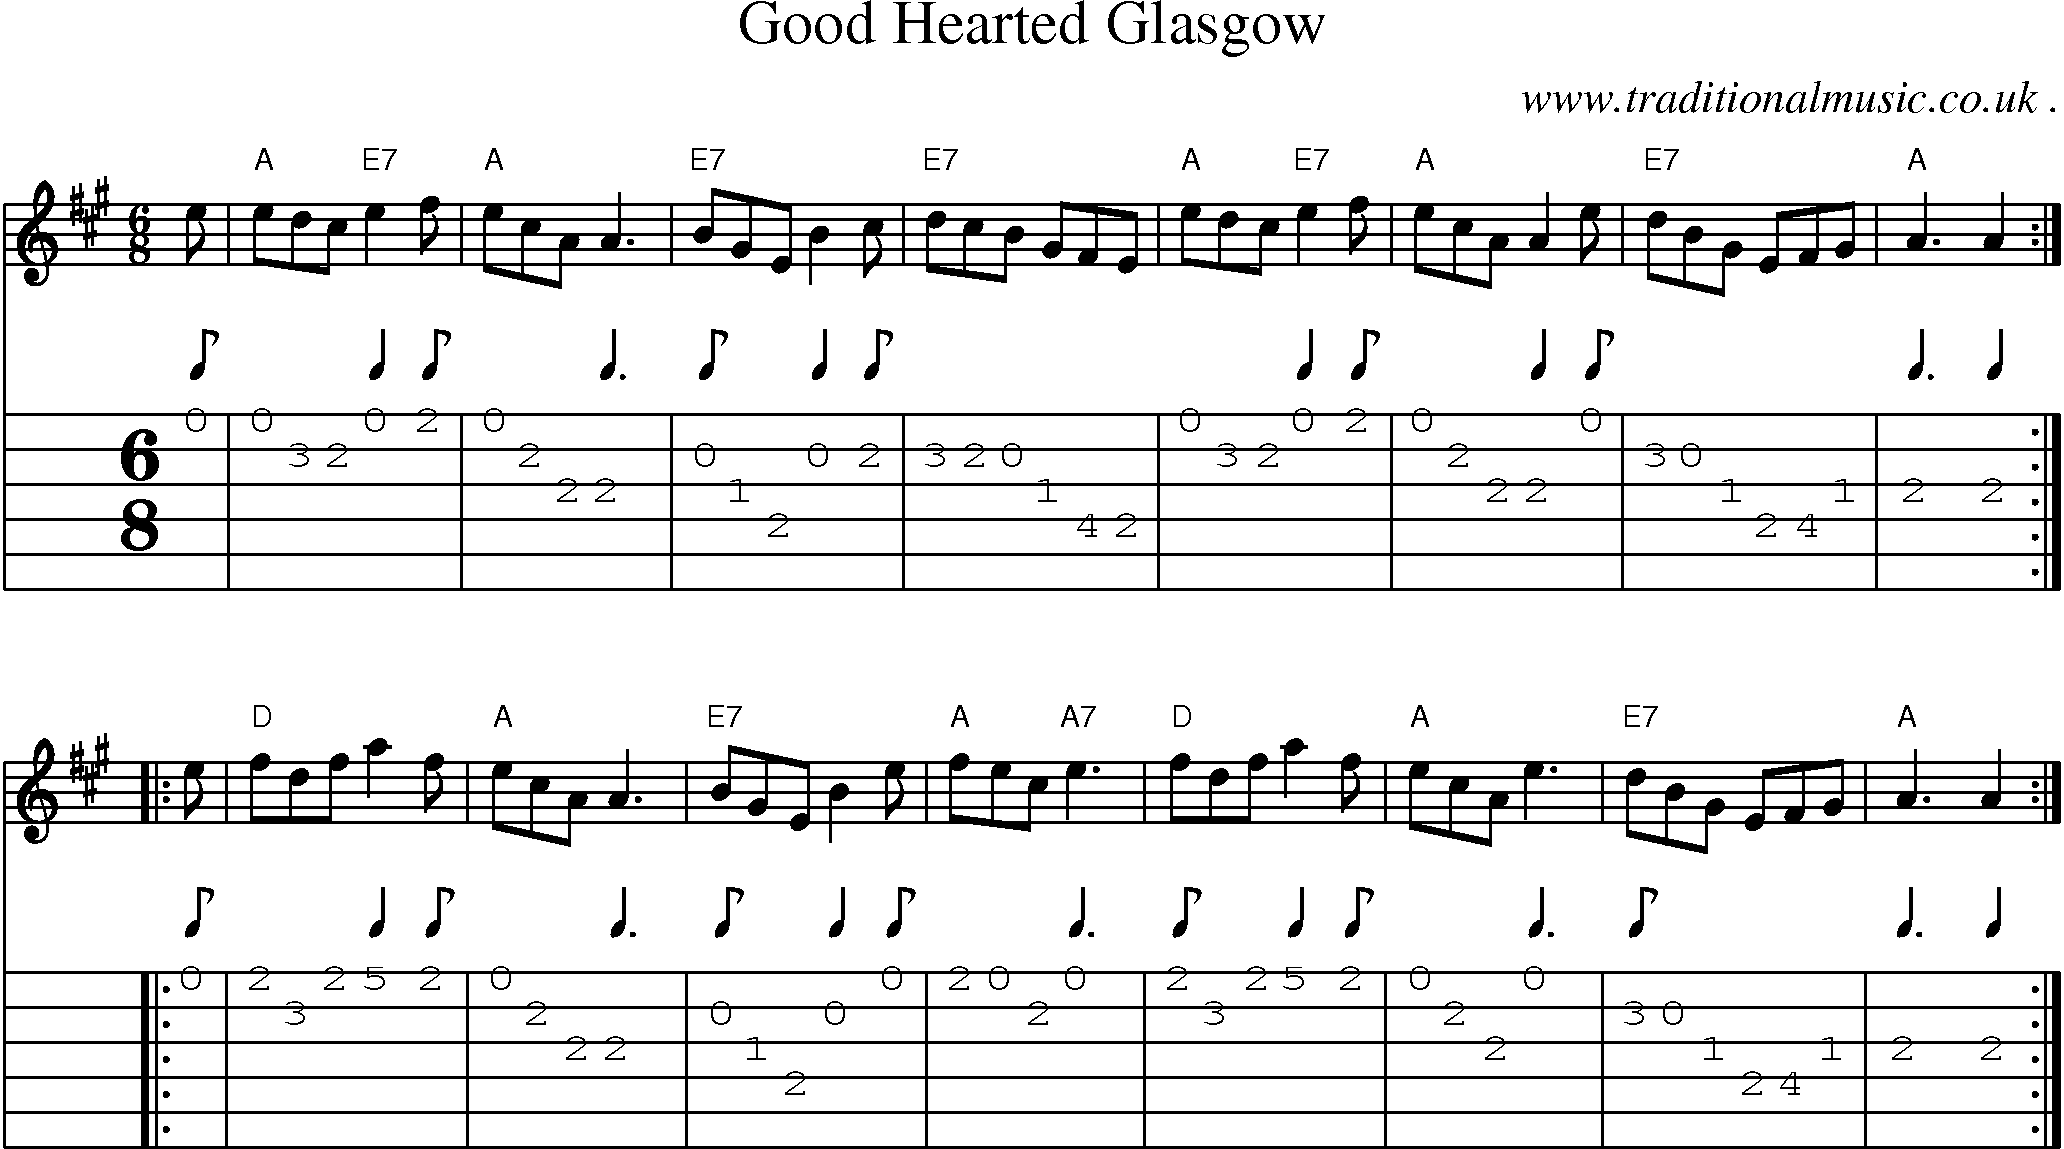 Sheet-music  score, Chords and Guitar Tabs for Good Hearted Glasgow